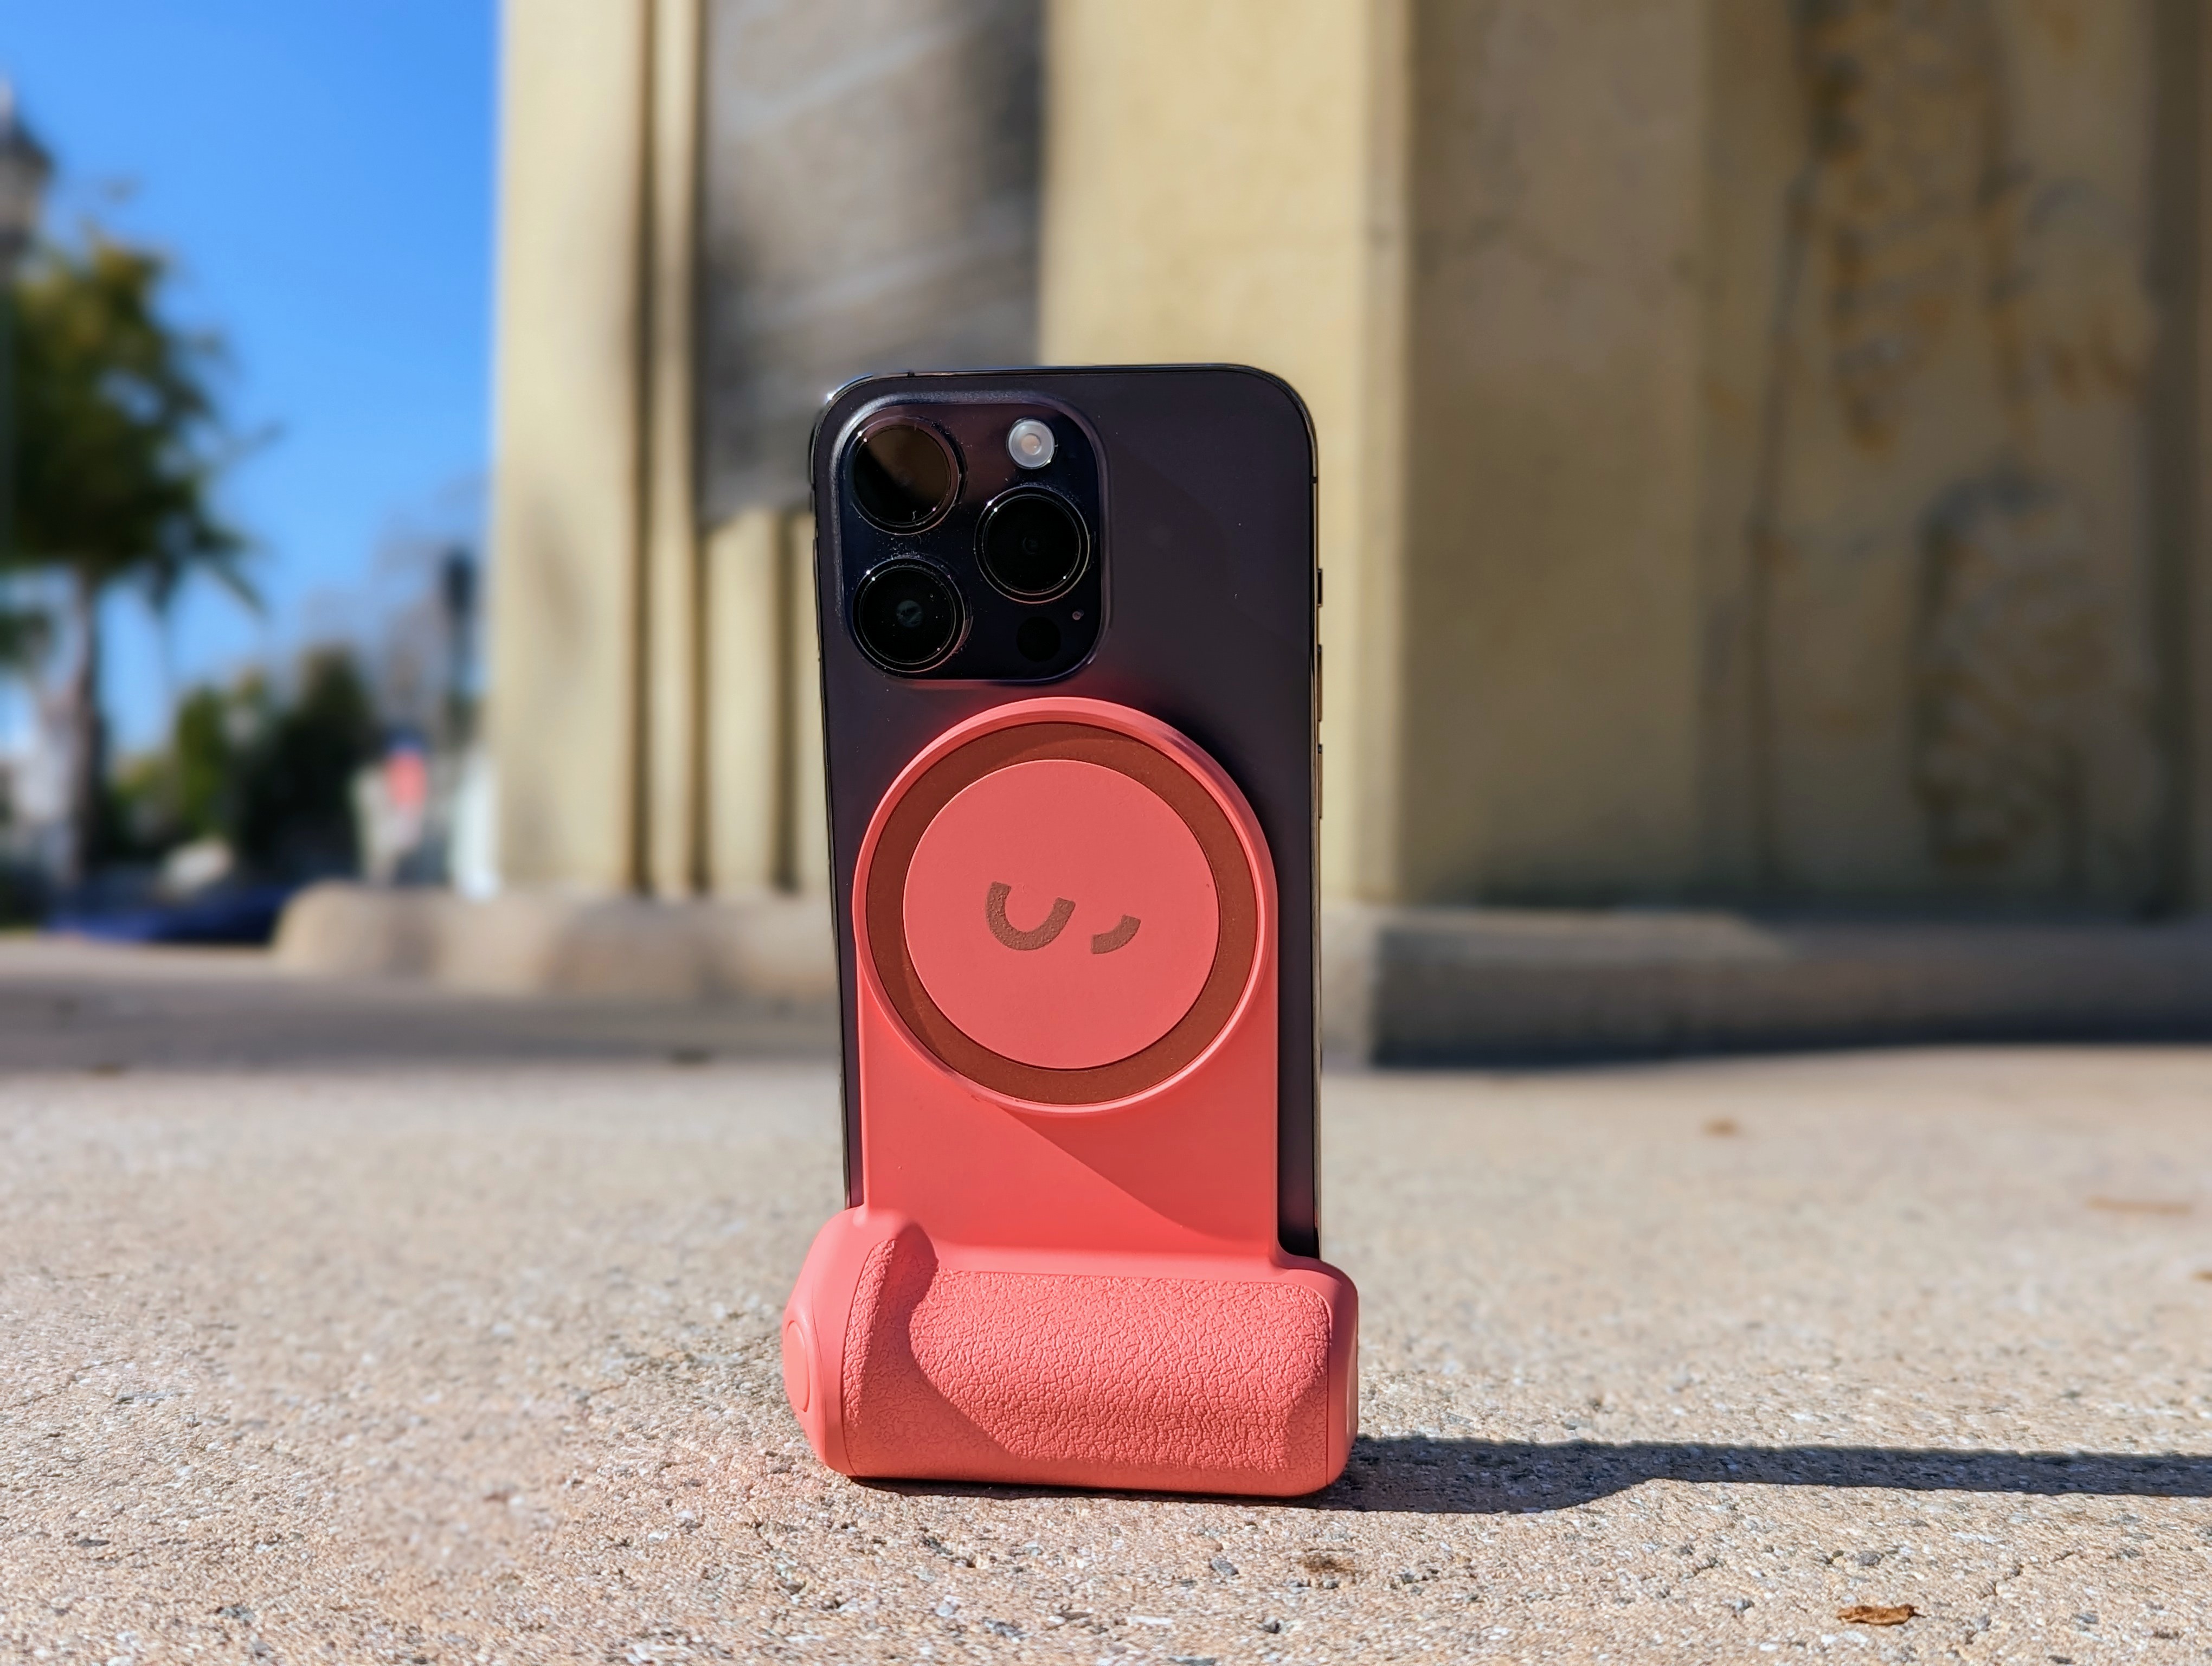 ShiftCam SnapGrip